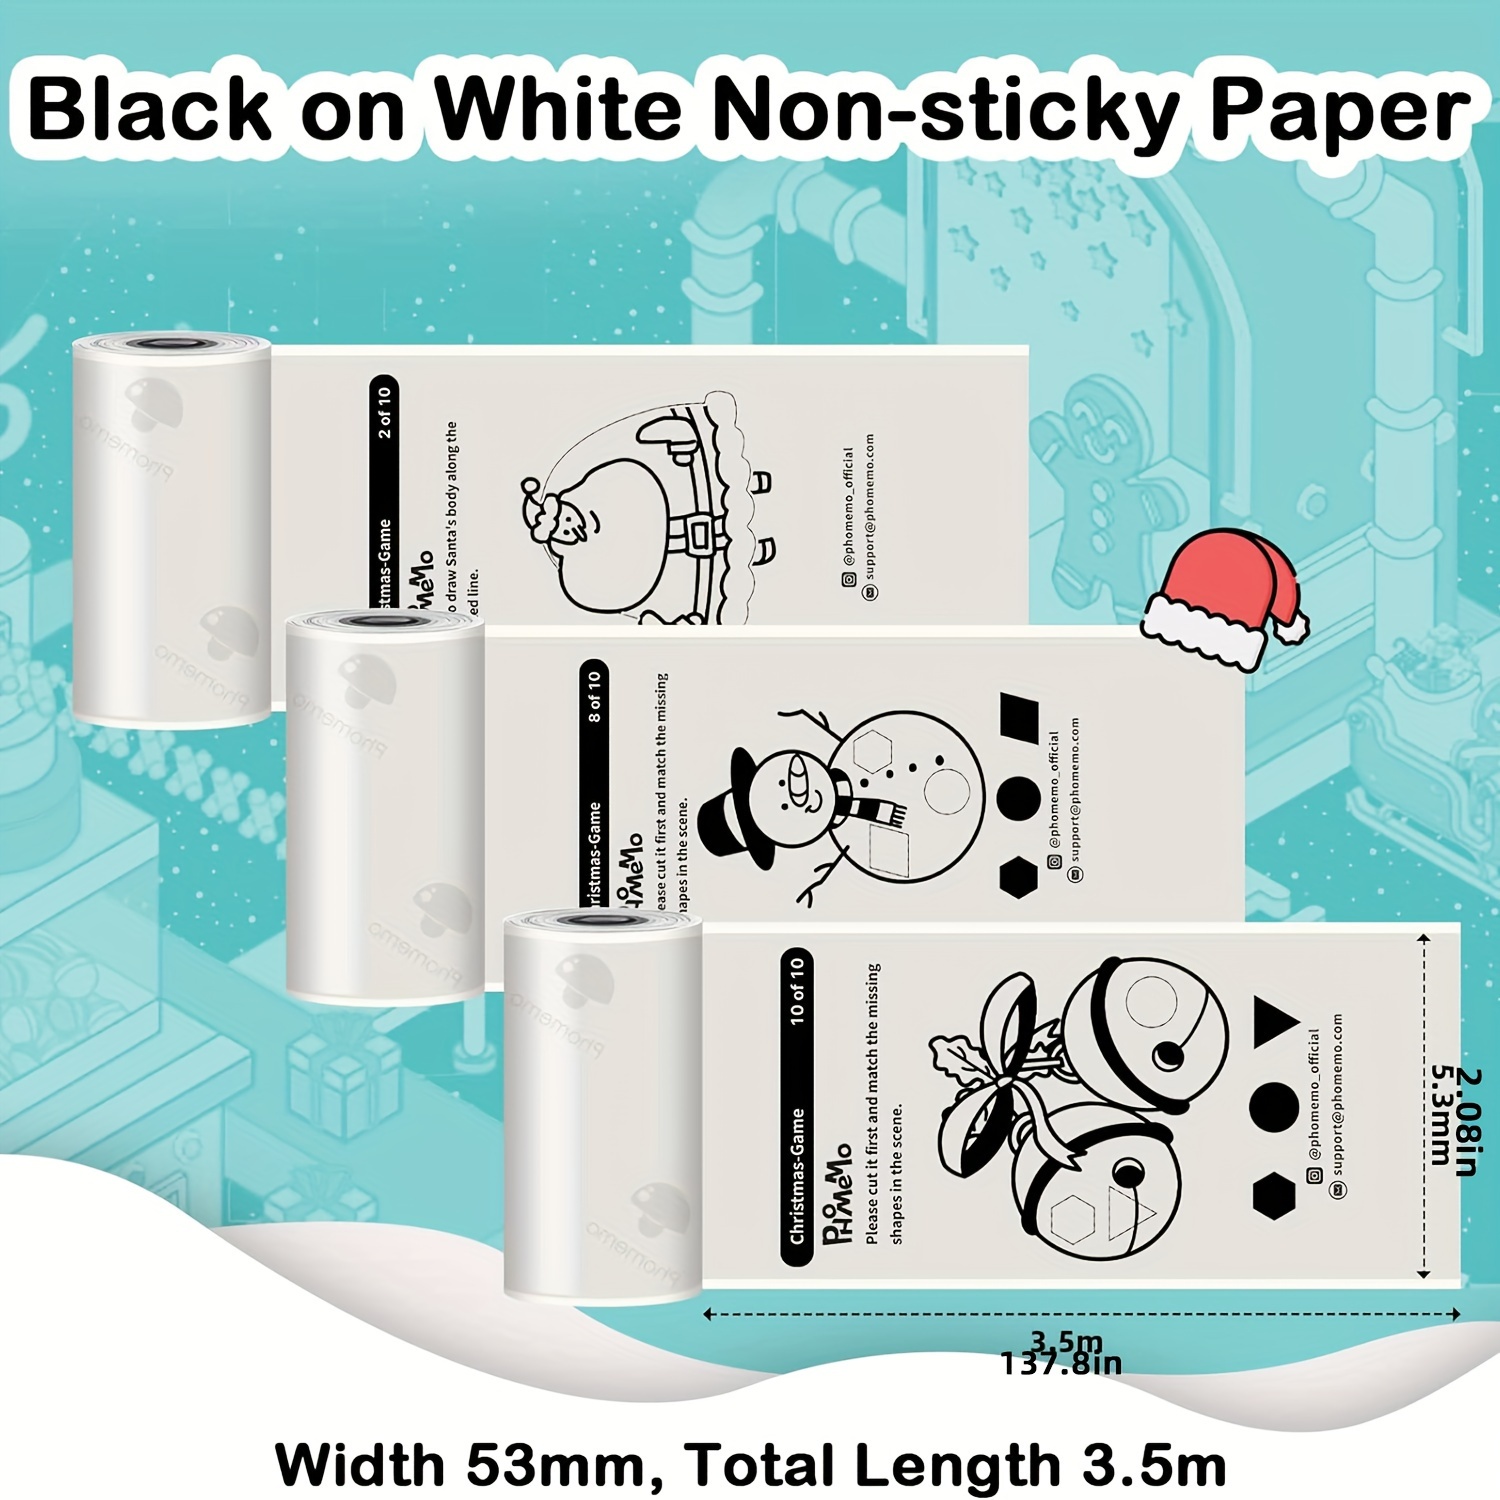 T02 Thermal Mini Sticker Printer Paper, White Non-Sticky Paper, Black On  White Paper for Journal, Photo, To Do List, 53mm x 6.5m, 3 Rolls, Keep for  10